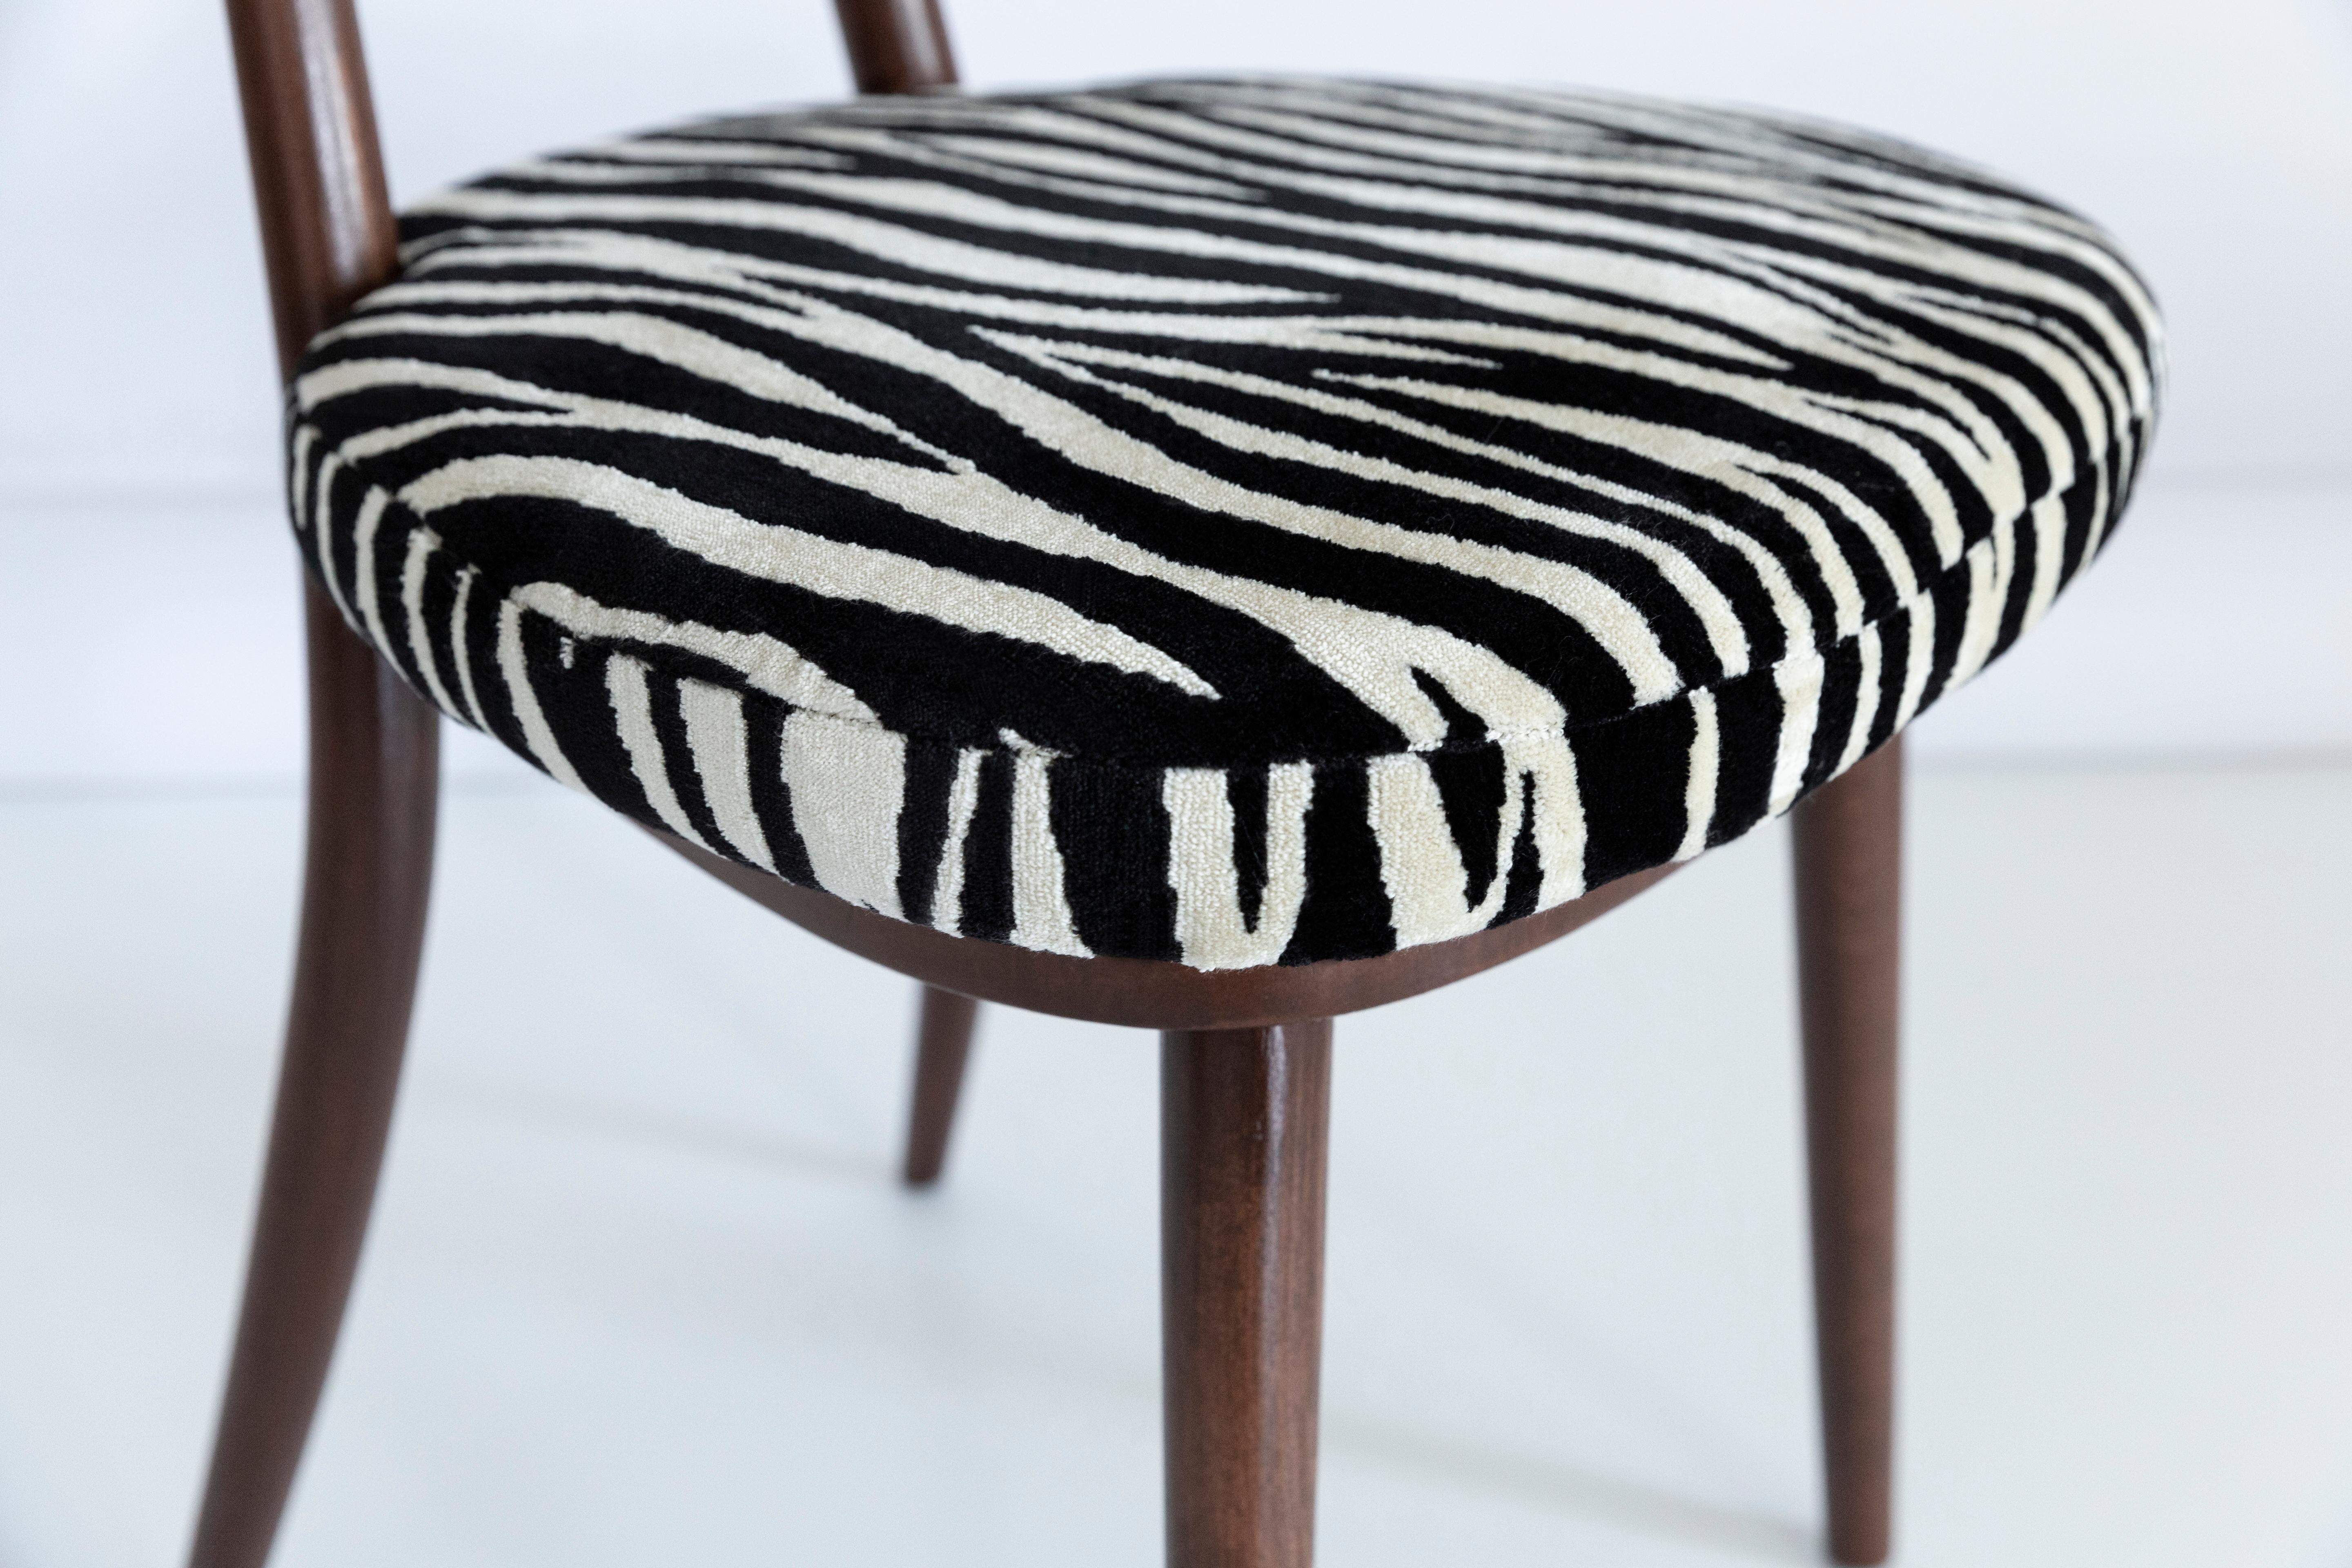 Set of Six Midcentury Zebra Black and White Heart Chairs, Poland, 1960s For Sale 5